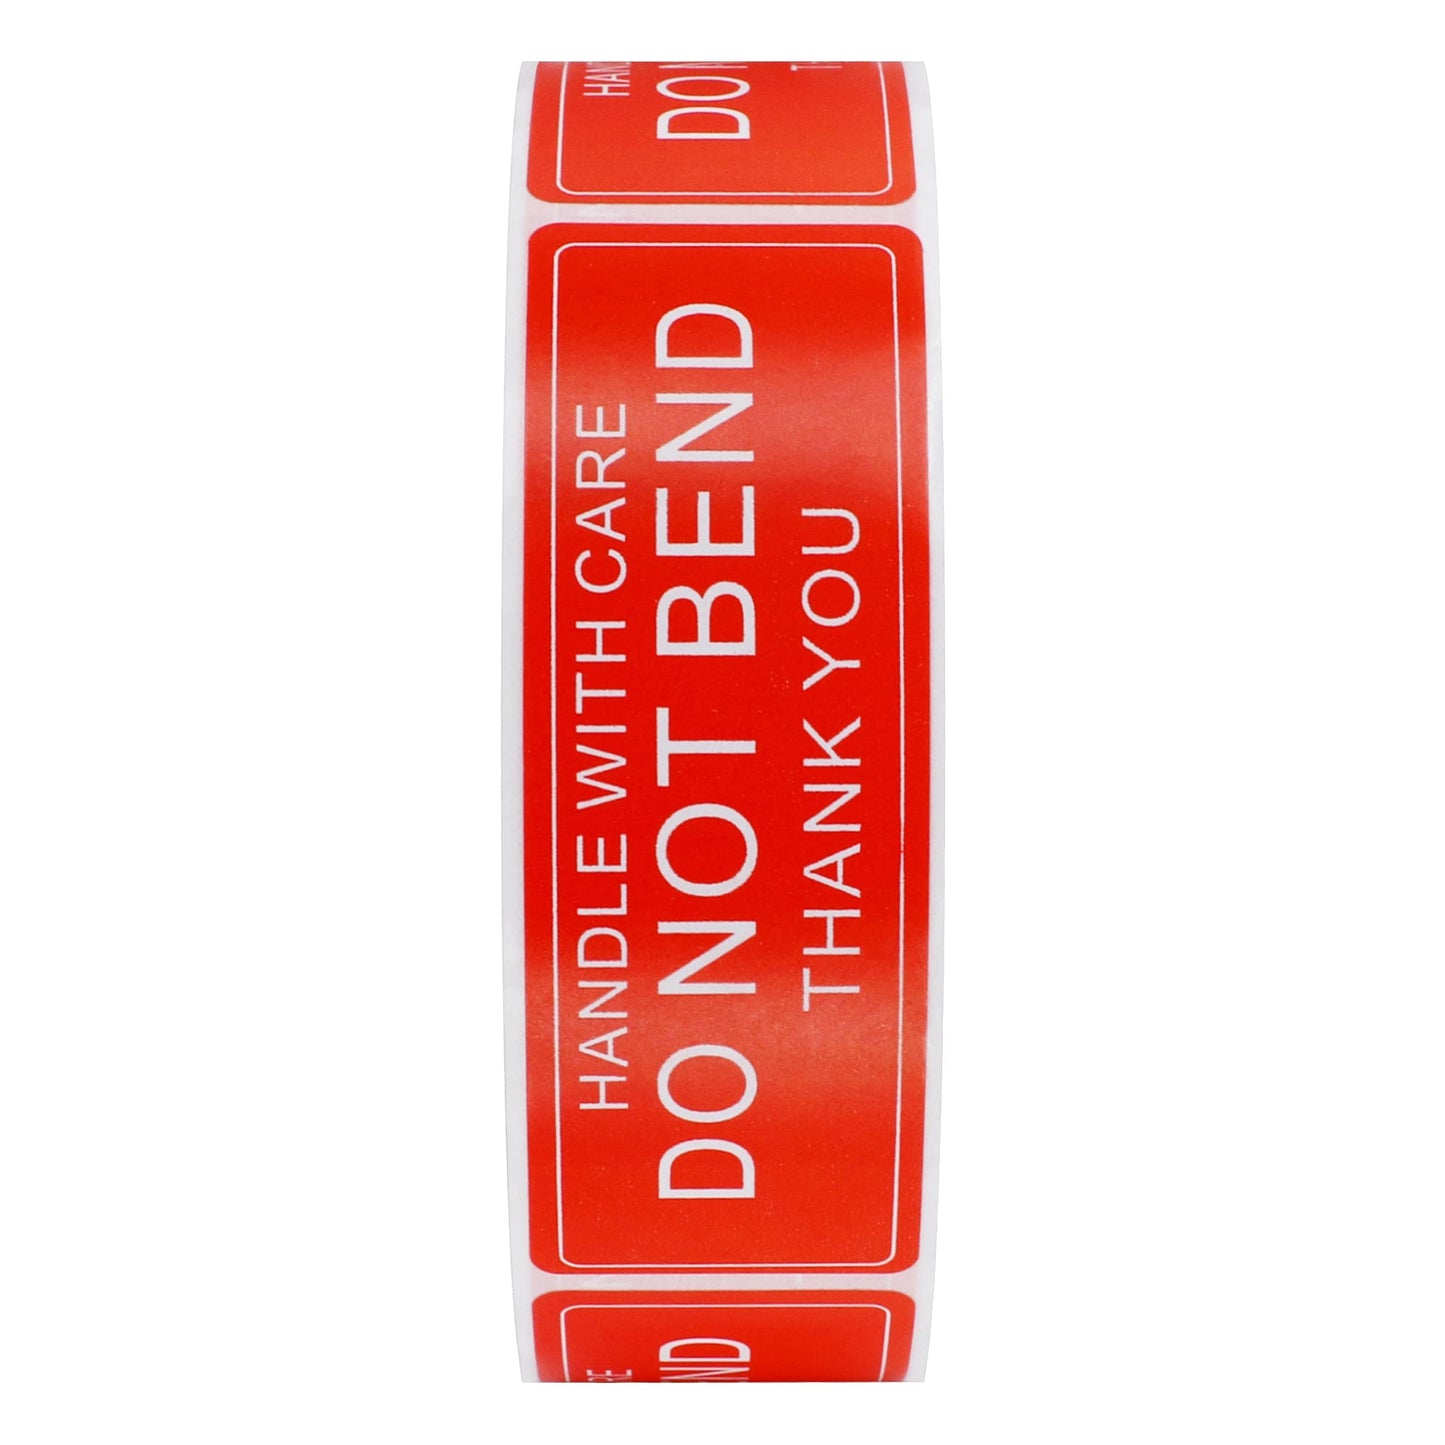 Hybsk 1"x3" Do Not Bend Stickers Shipping Labels for Envelopes Mailing Adhesive Label 500 Per Roll